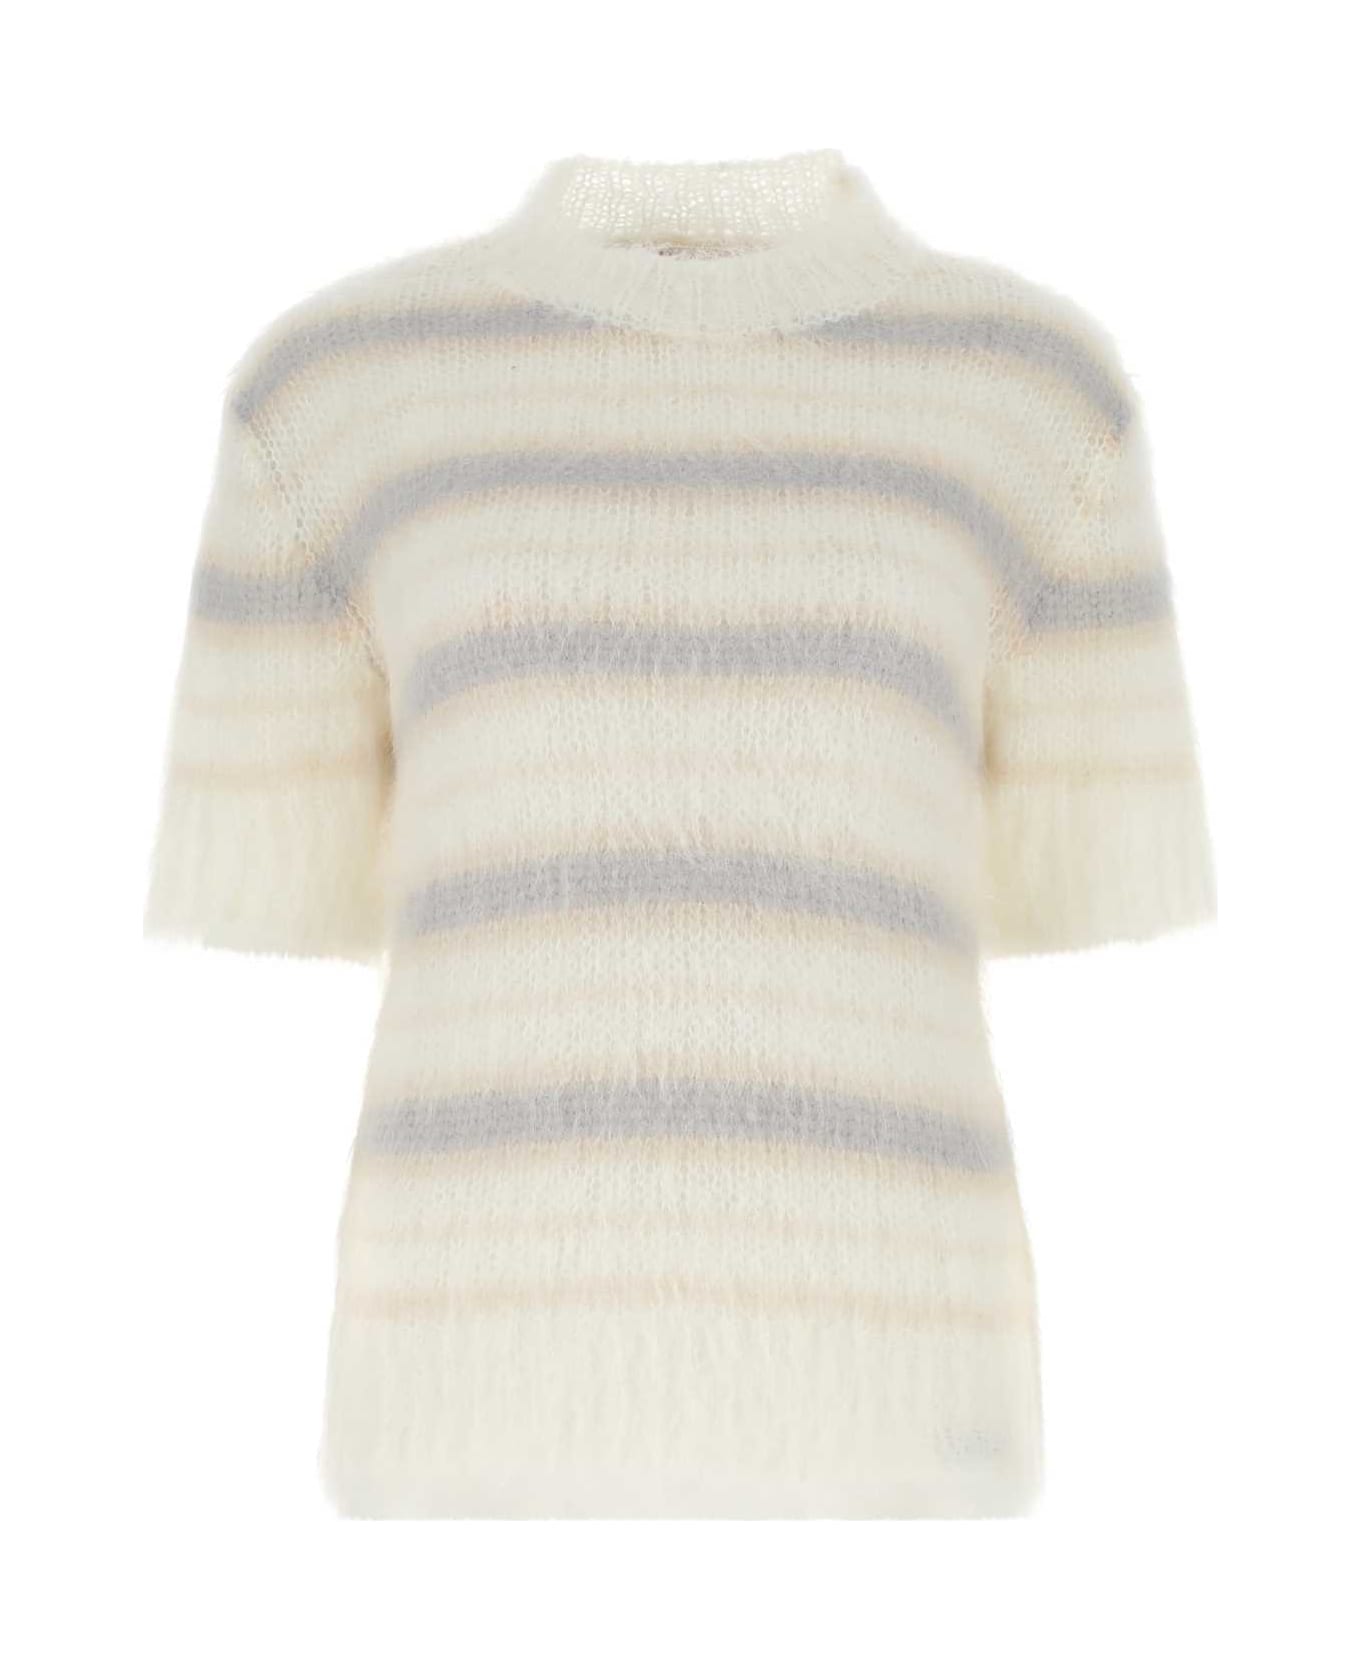 Marni Embroidered Mohair Blend Sweater - NATURALWHIITE ニットウェア